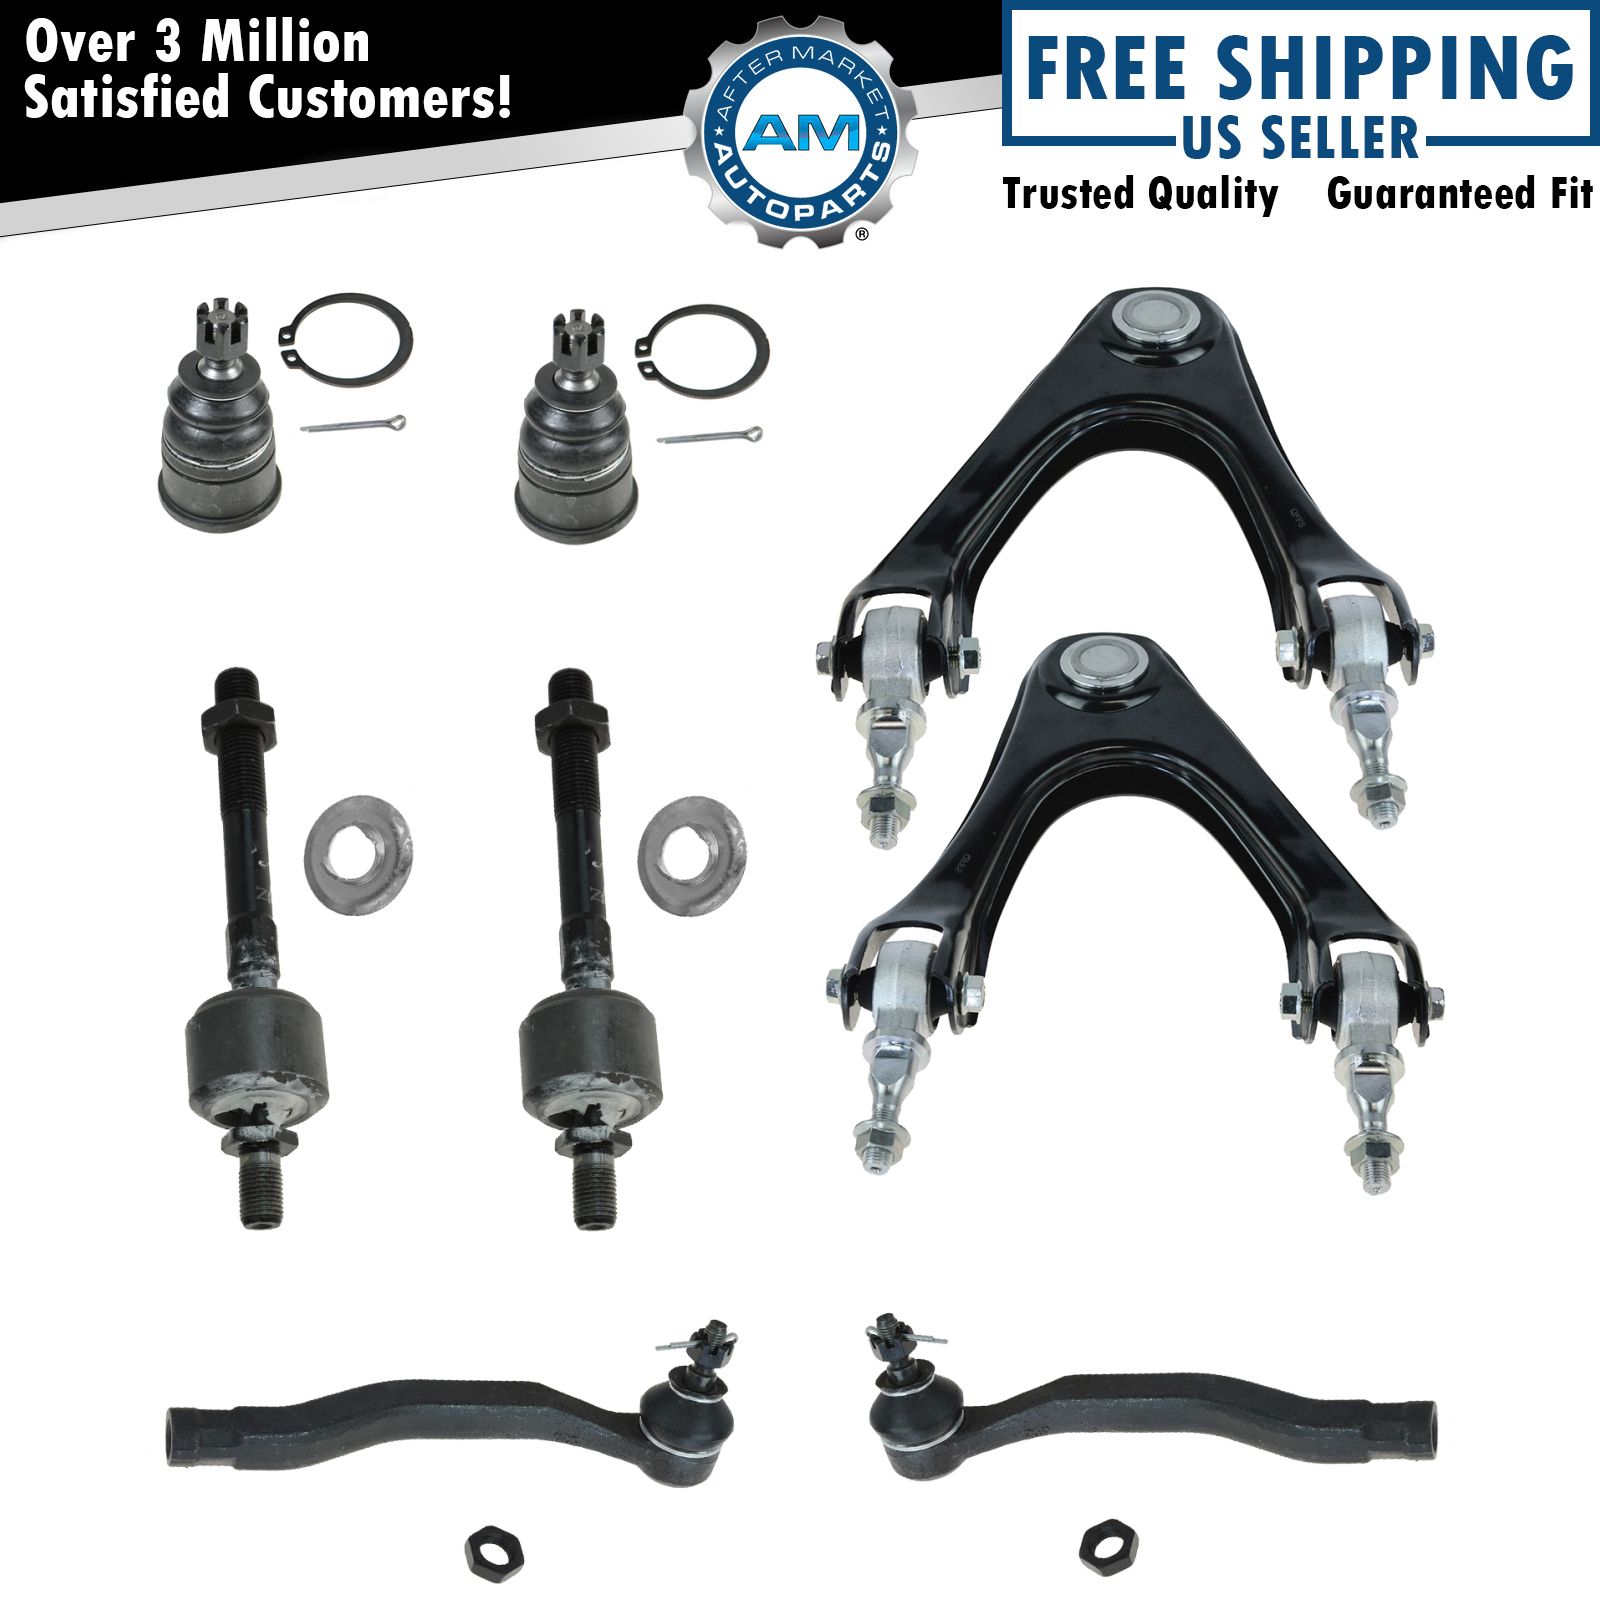 Suspension Front 8 Piece Kit Set for Acura CL Honda Accord Odyssey Isuzu Oasis